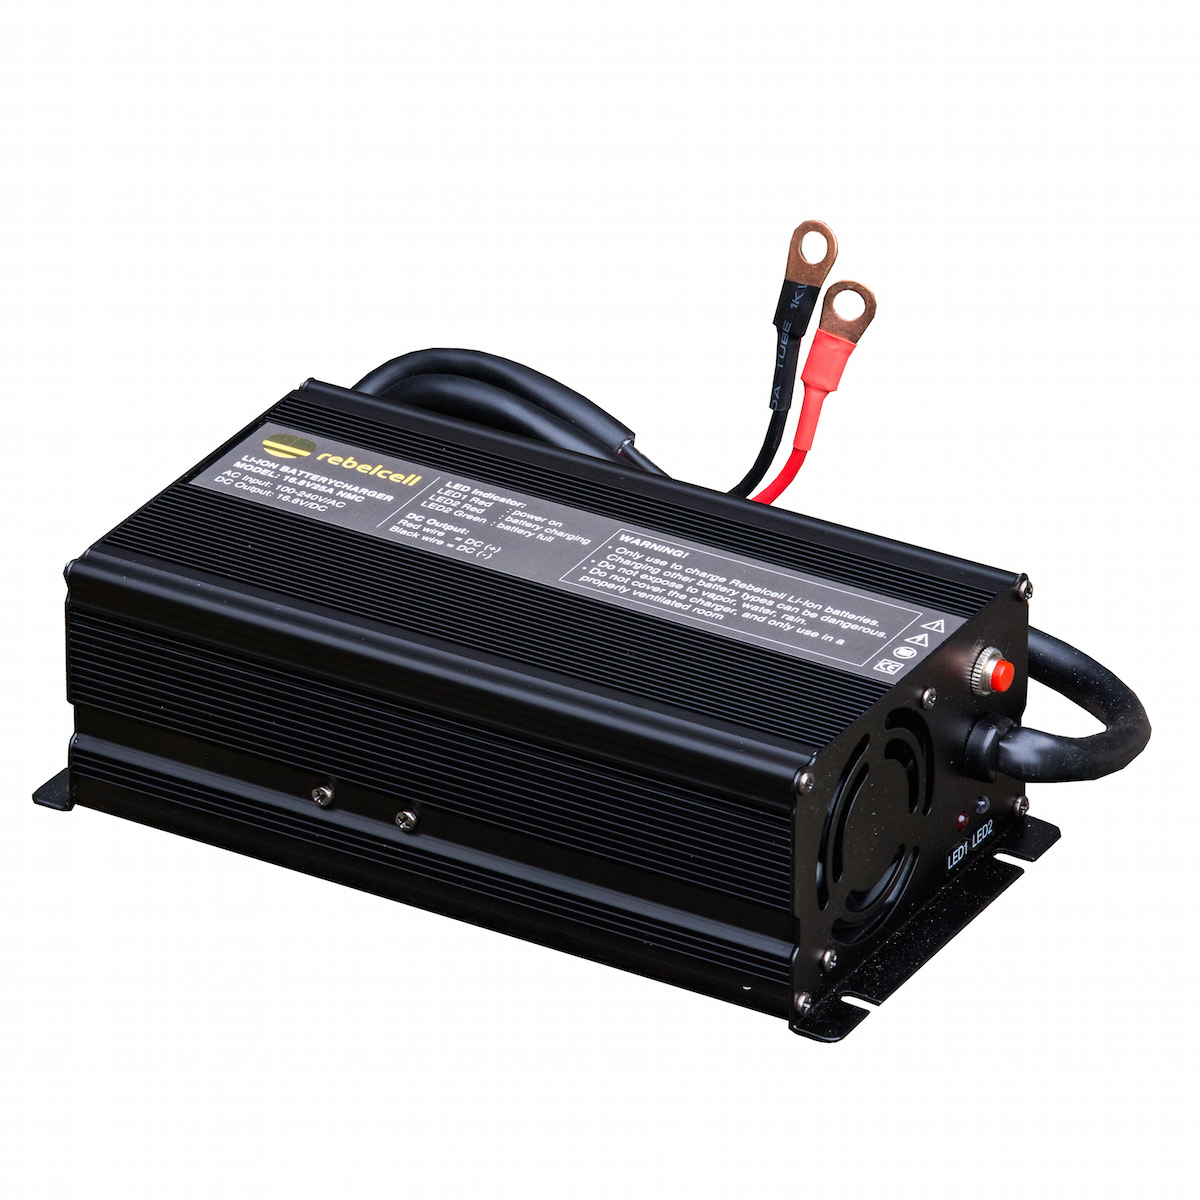 Rebelcell charger 16.8V25A product image